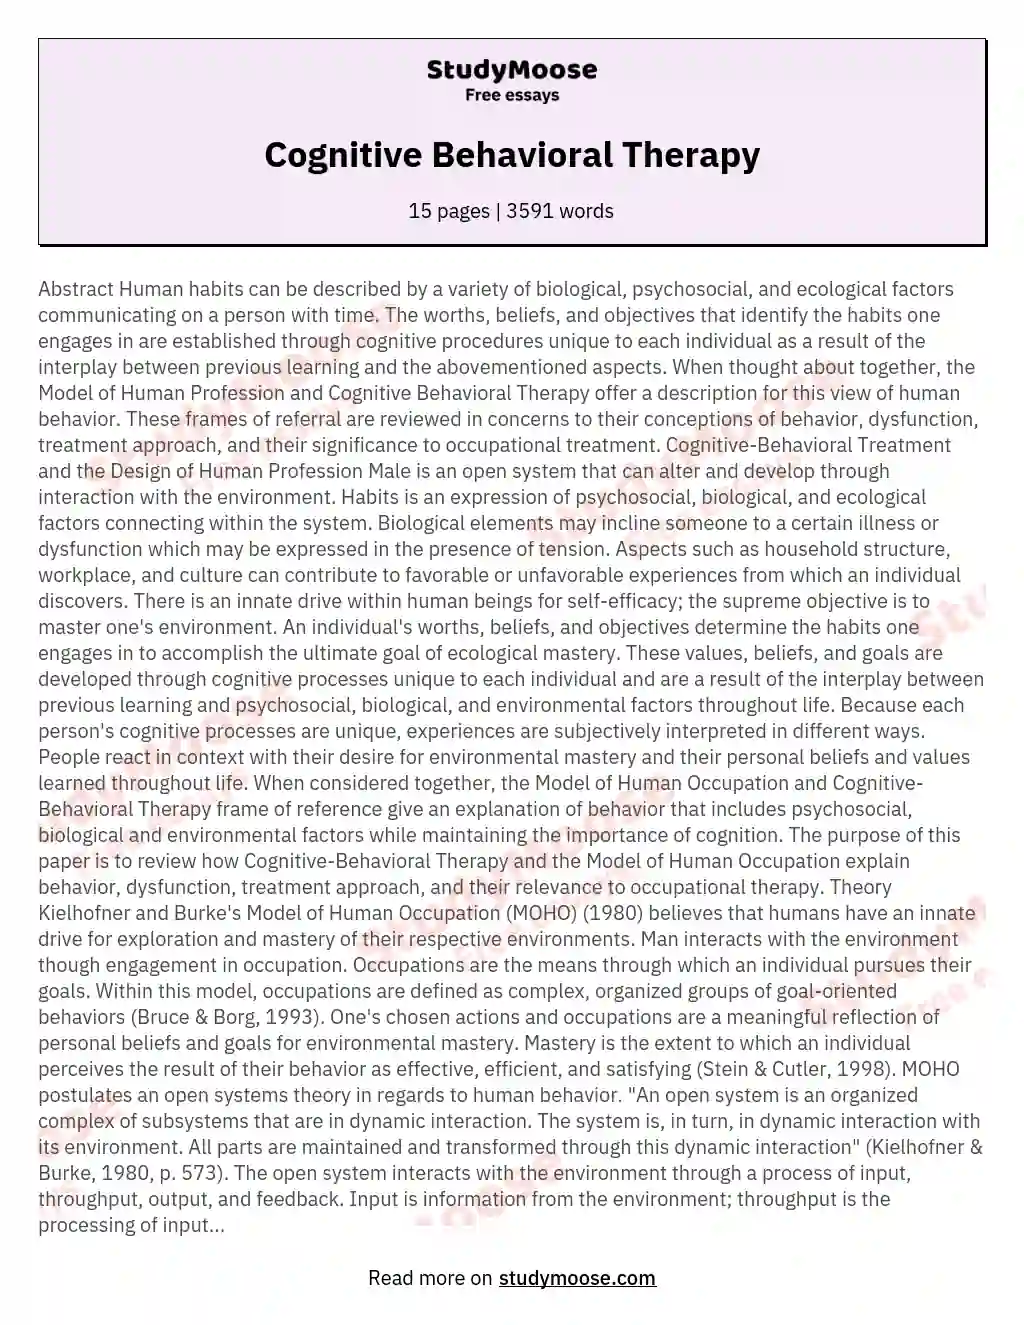 Cognitive Behavioral Therapy Free Essay Example